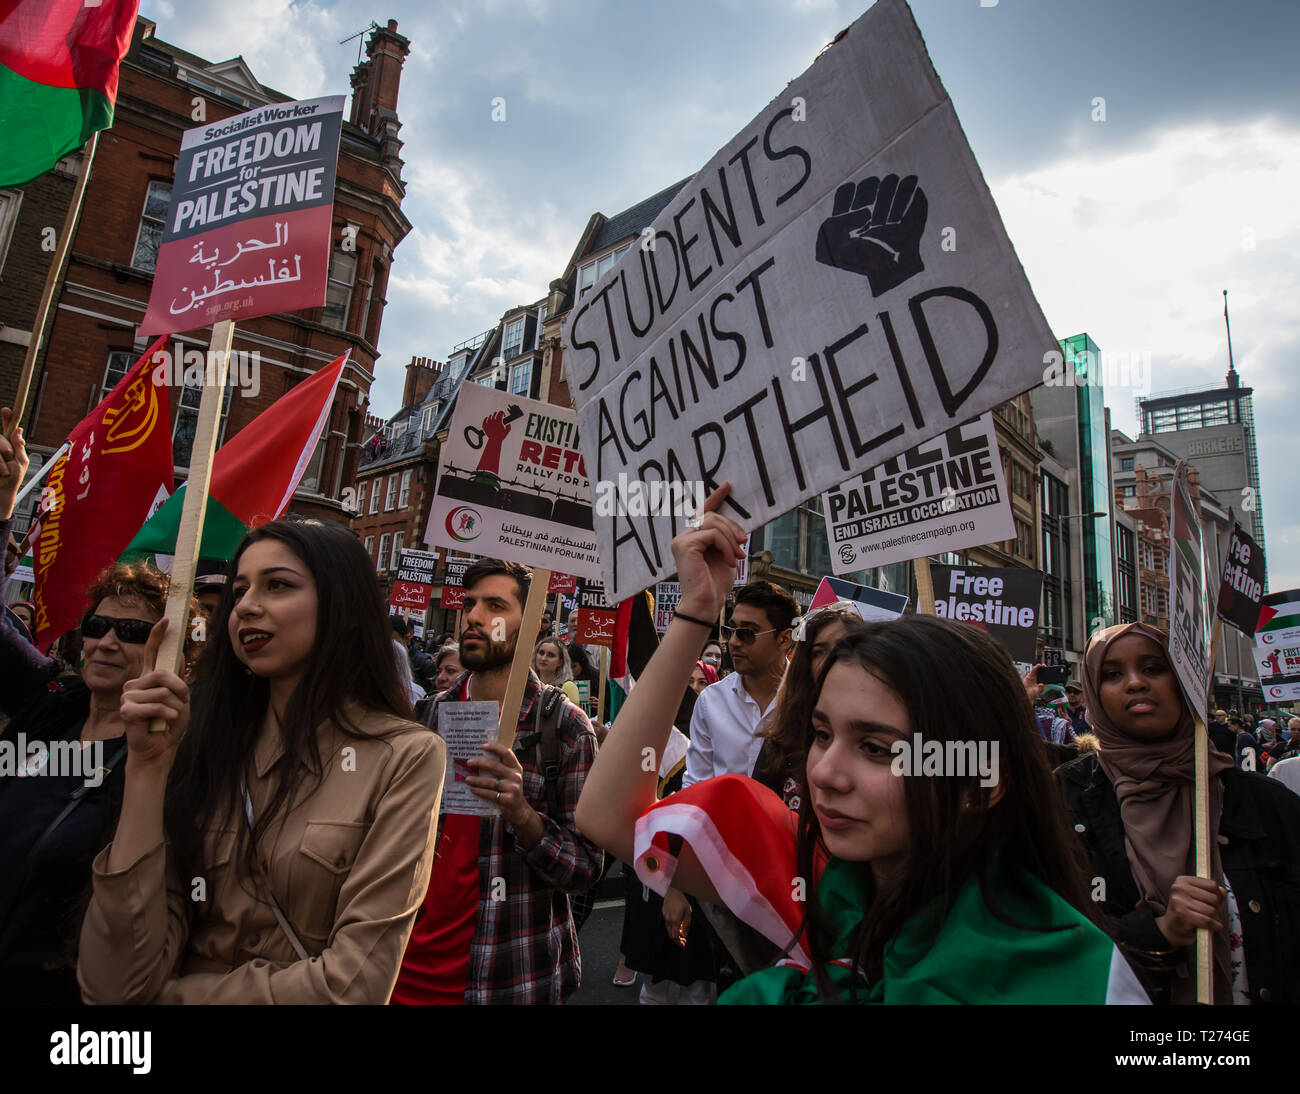 London, UK. 30 March, 2019. Palestinians and supporters gathered outside of the Israeli Embassy in London to mark the beginning of Nakba and to call on the global community to hold Israel to account for their violation of human rights and International law. David Rowe/ Alamy Live News. Stock Photo